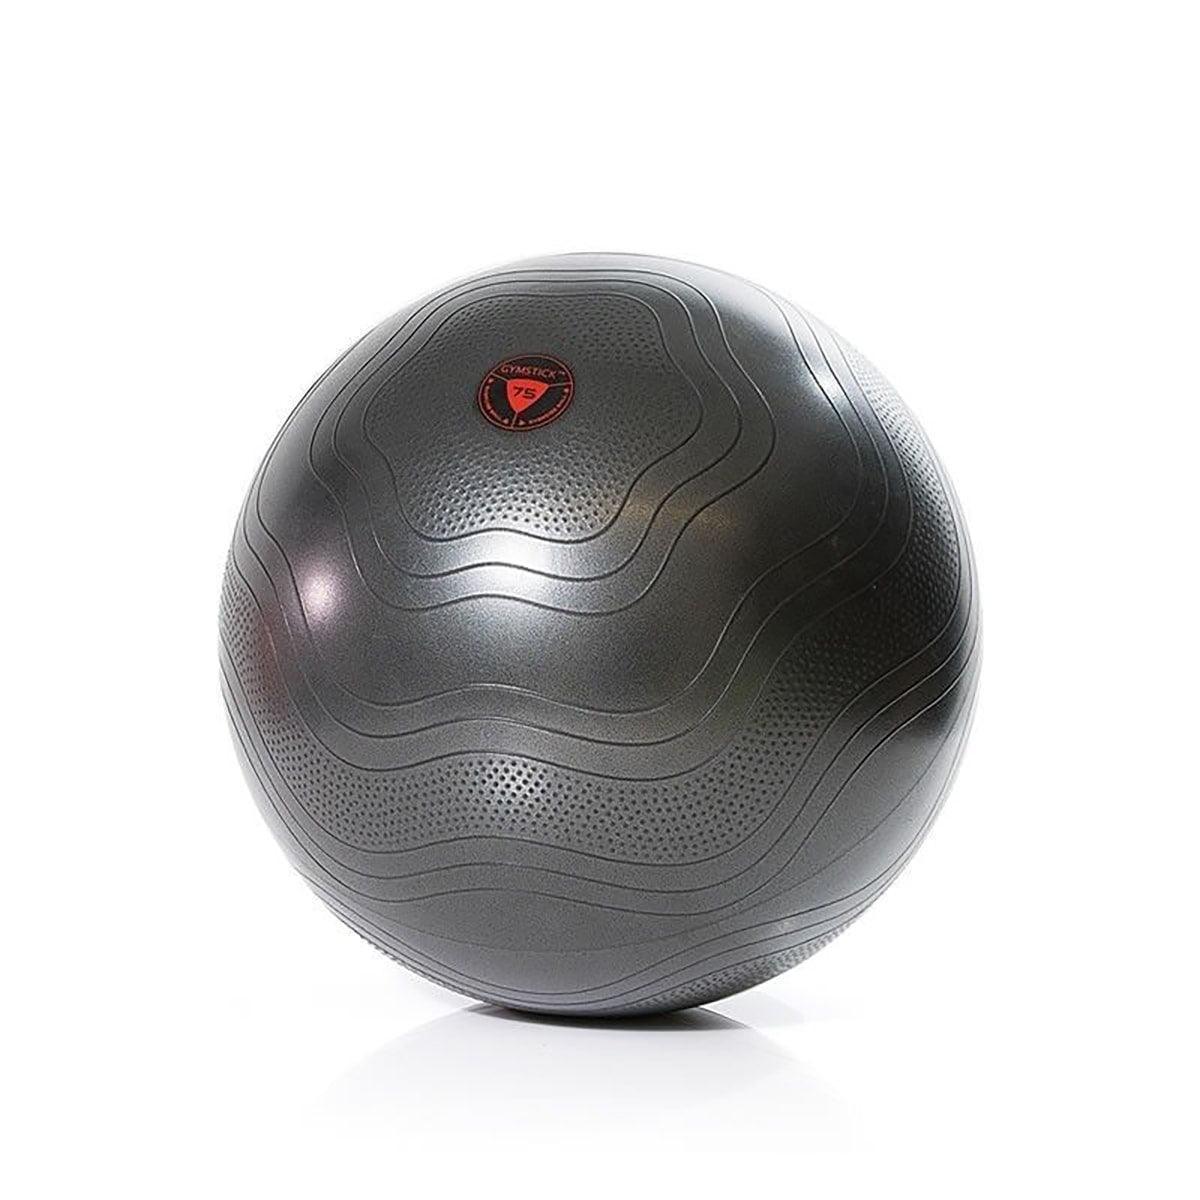 Gymstick Exercise Ball Gymboll